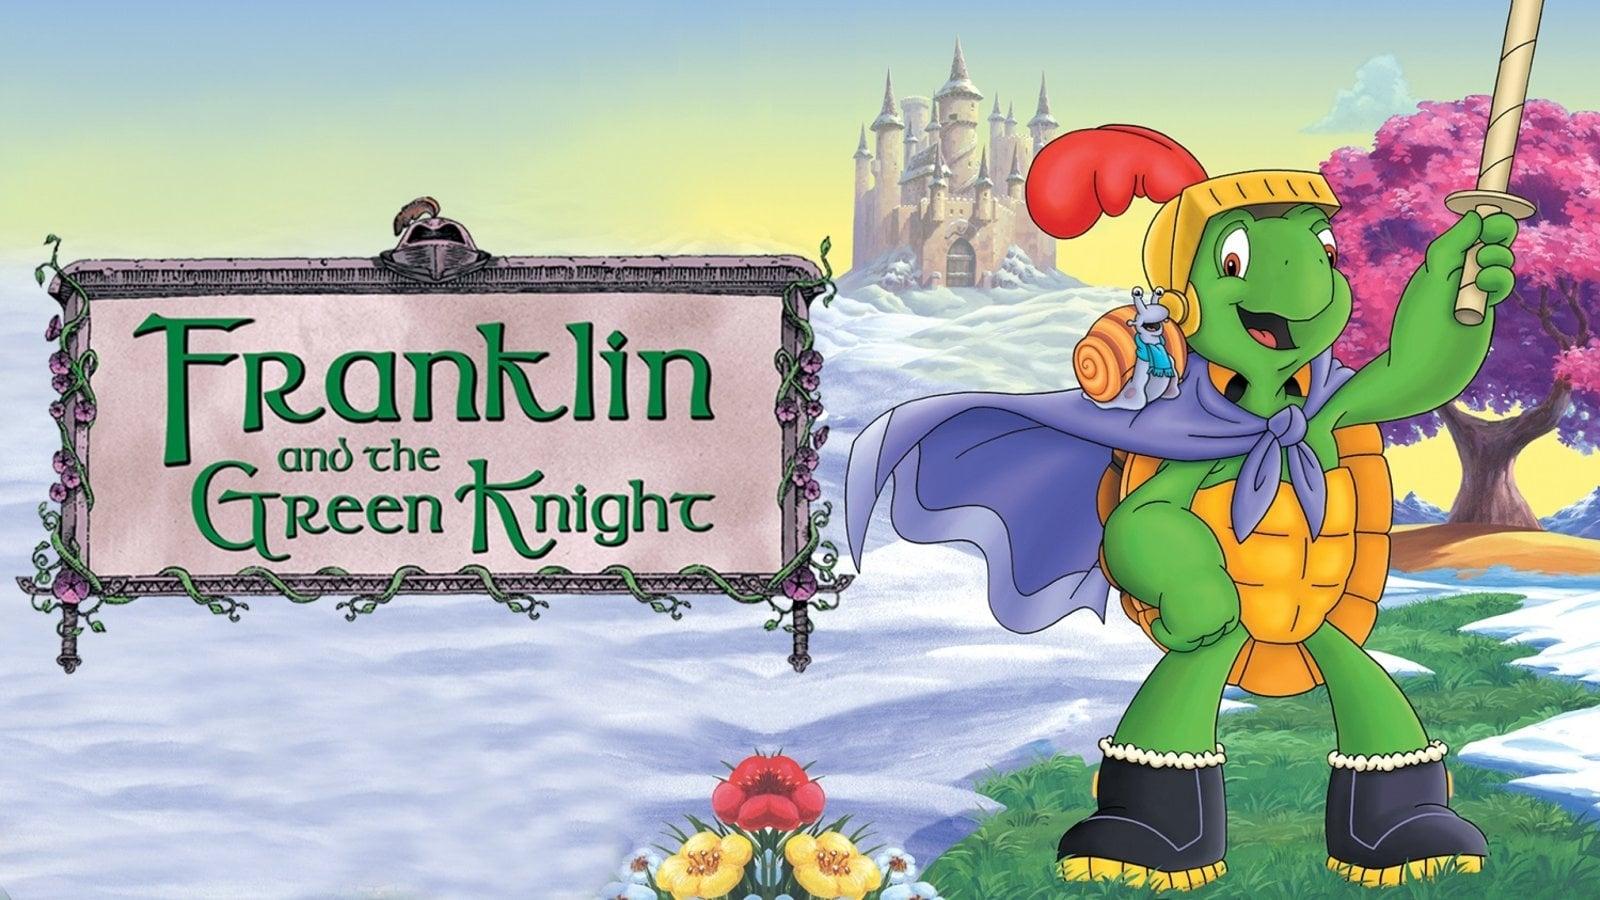 Franklin and the Green Knight backdrop